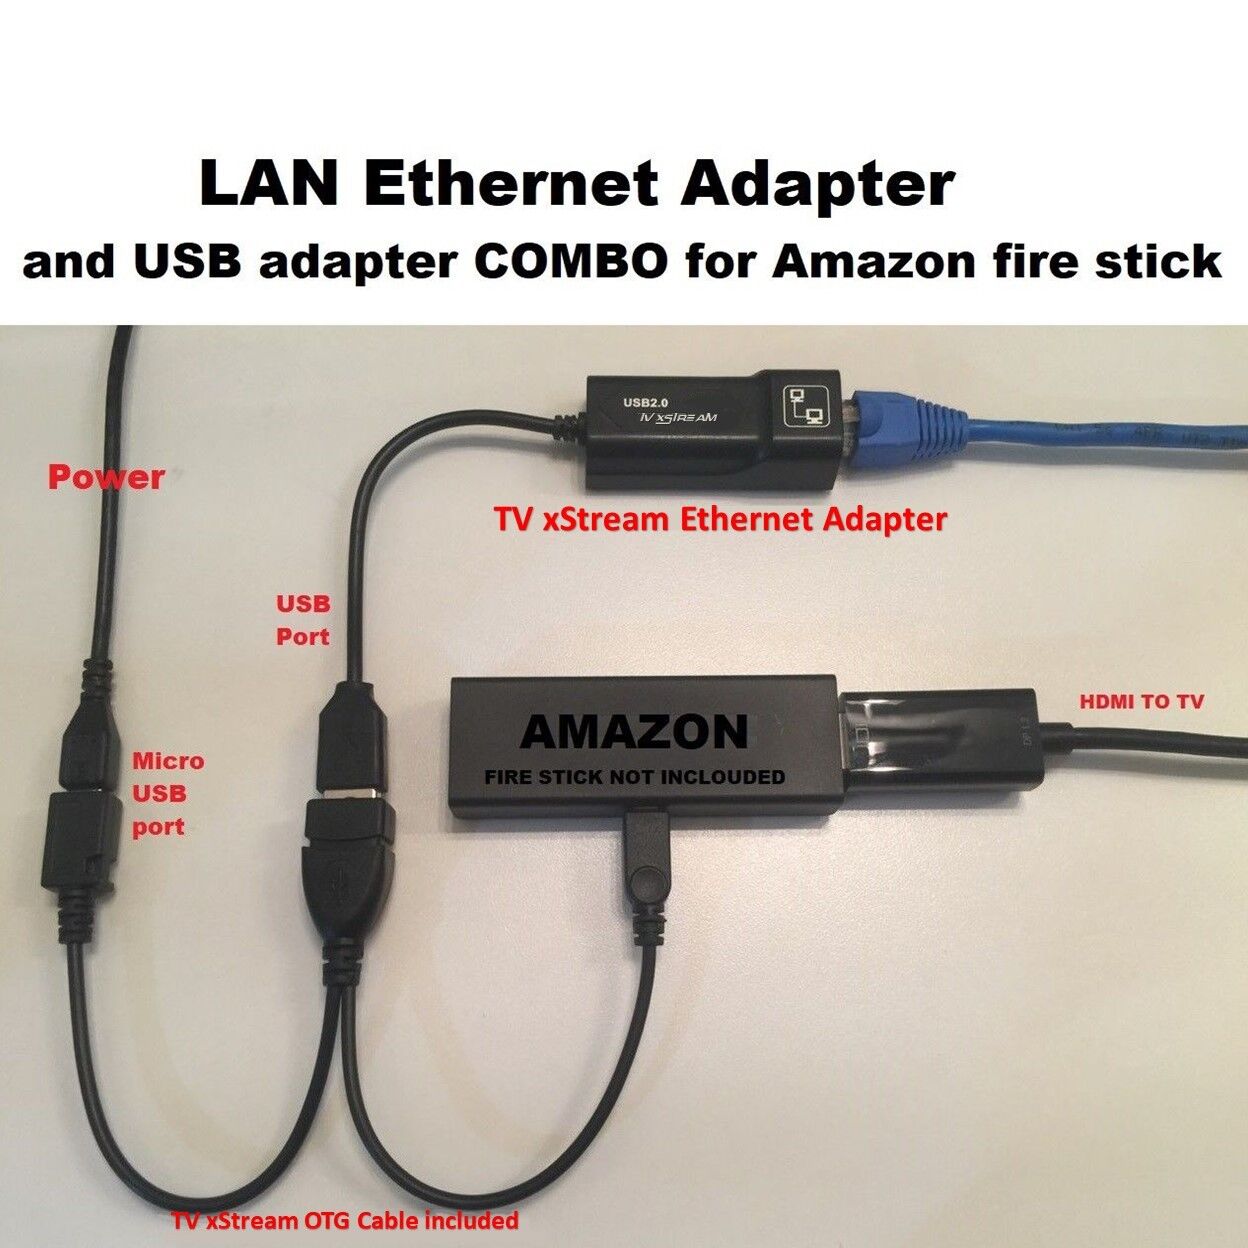 Amazon Fire Stick ETHERNET ADAPTER & USB OTG cable REDUCE BUFFERING - TV xStream